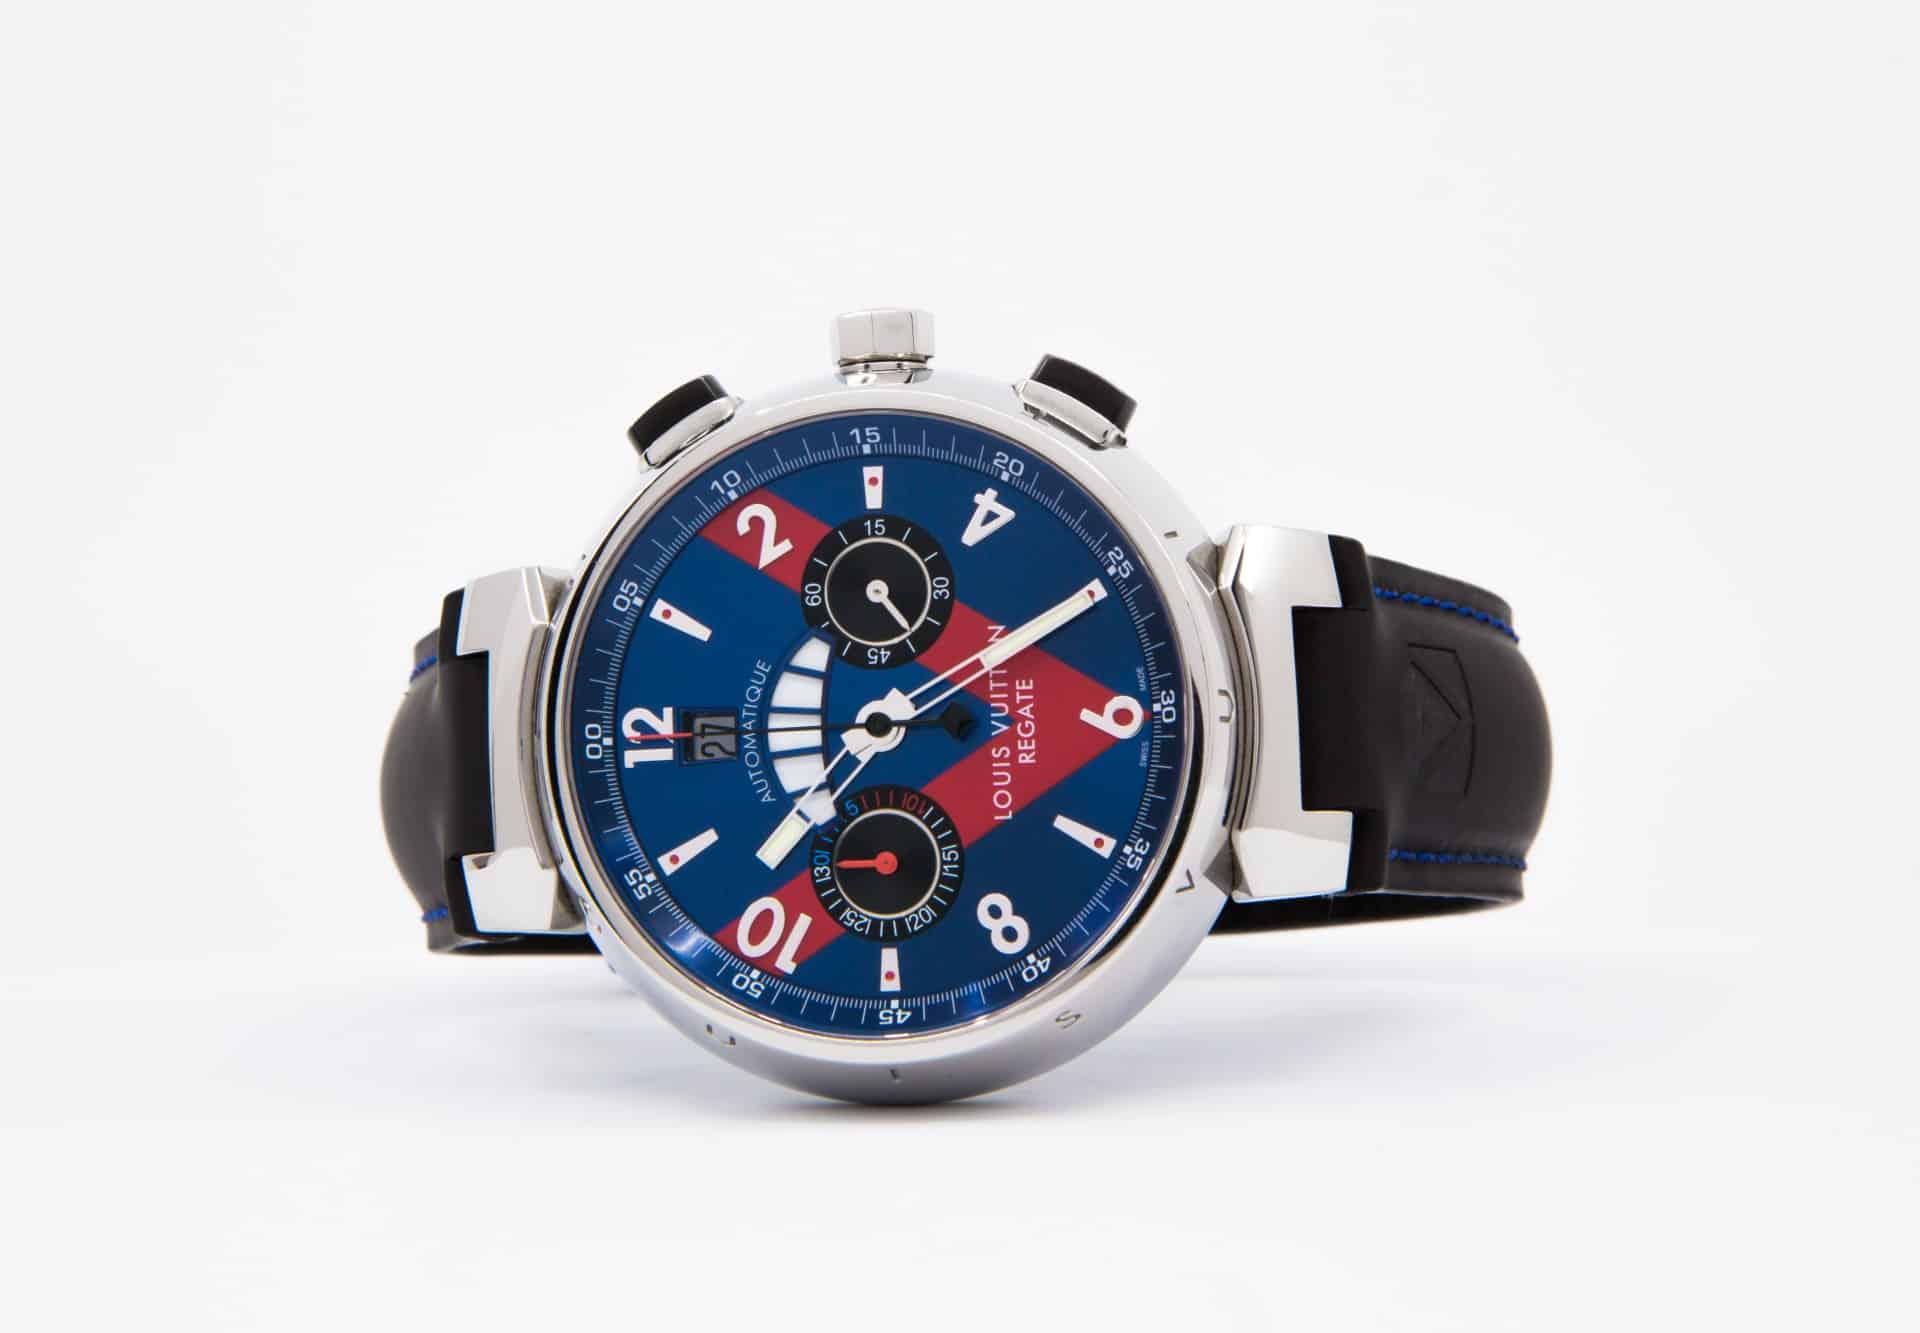 Louis Vuitton Tambour America's Cup Chronograph Automatic Watch